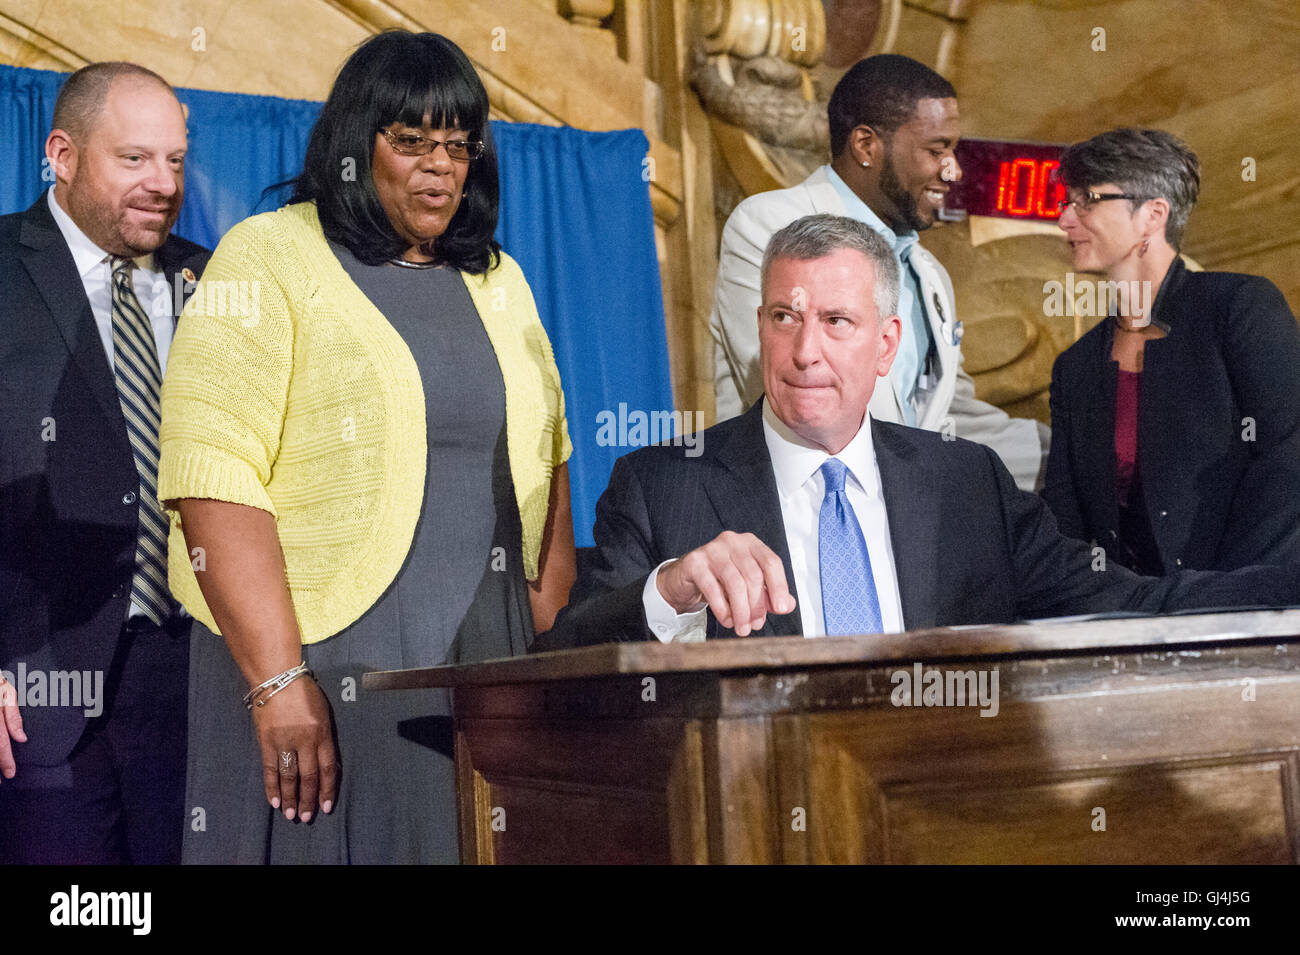 New York Mayor Bill de Blasio, at a bill signing related to NYPD reporting procedures on Wednesday, August 3, 2016 in New York. (© Frances M. Roberts) Stock Photo